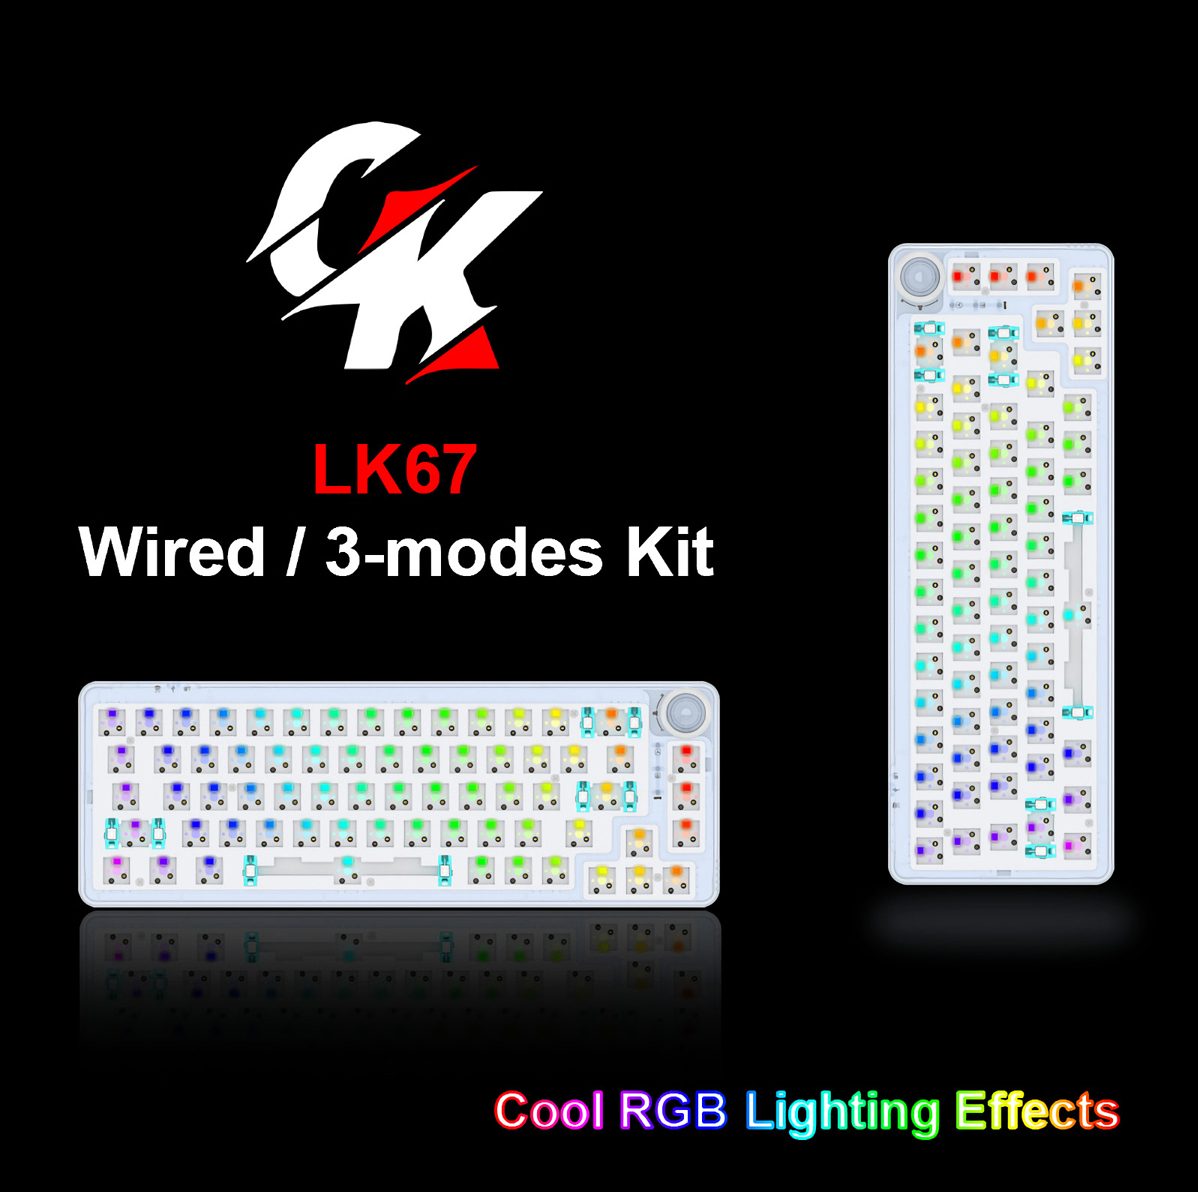 GamaKay LK67 Keyboard Customized Kit: Customizable, 67 Keys, RGB, and Hot Swappable for €27 Only